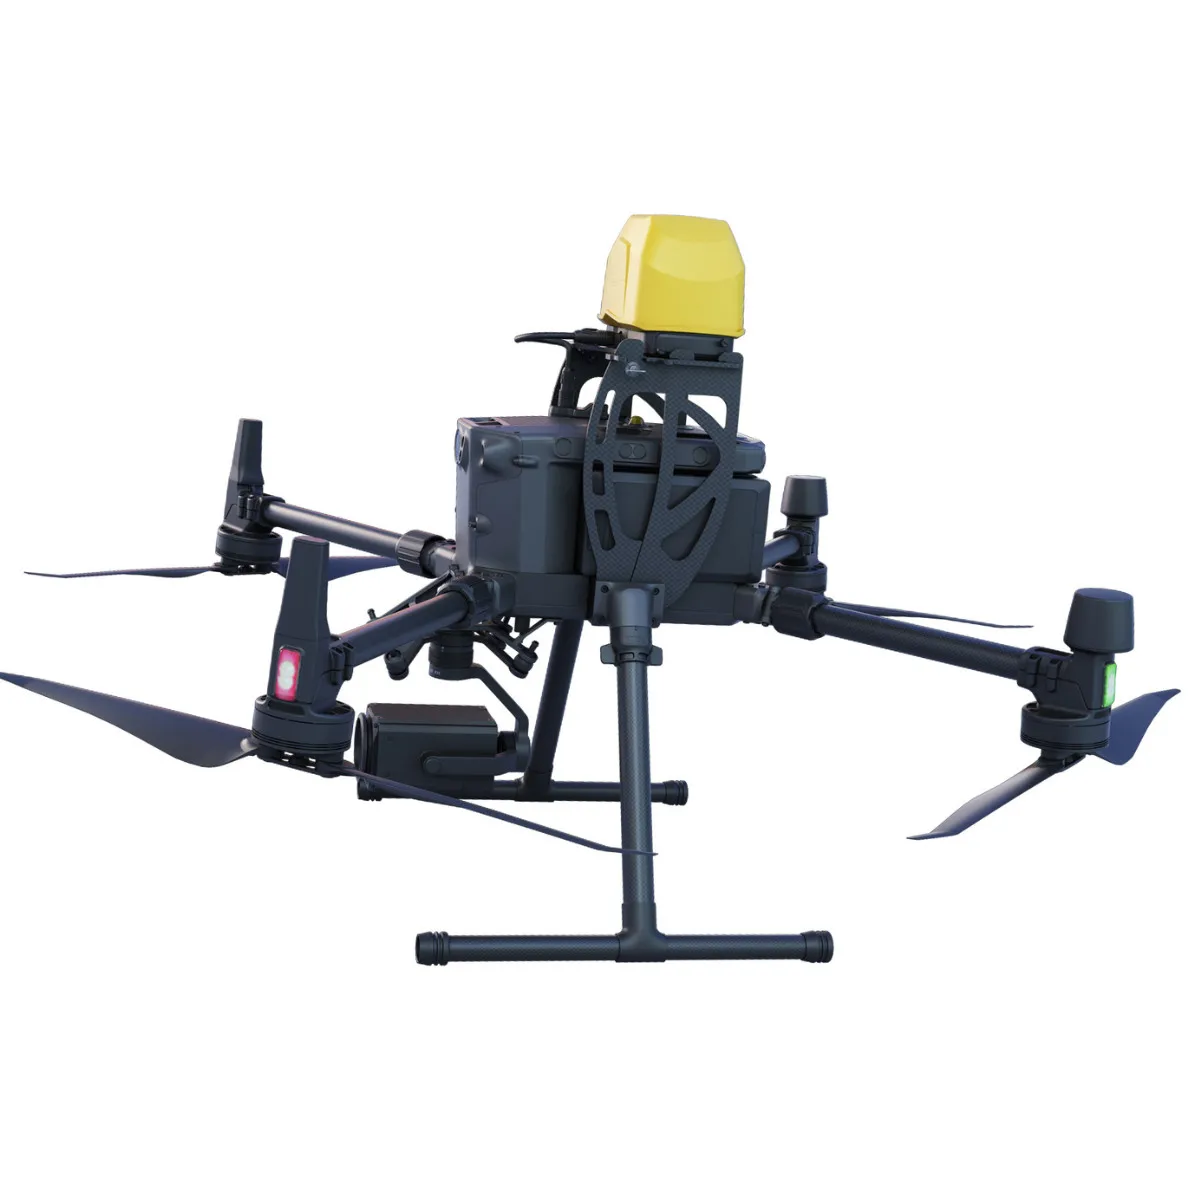 Parachute recovery system for M350 RTK 